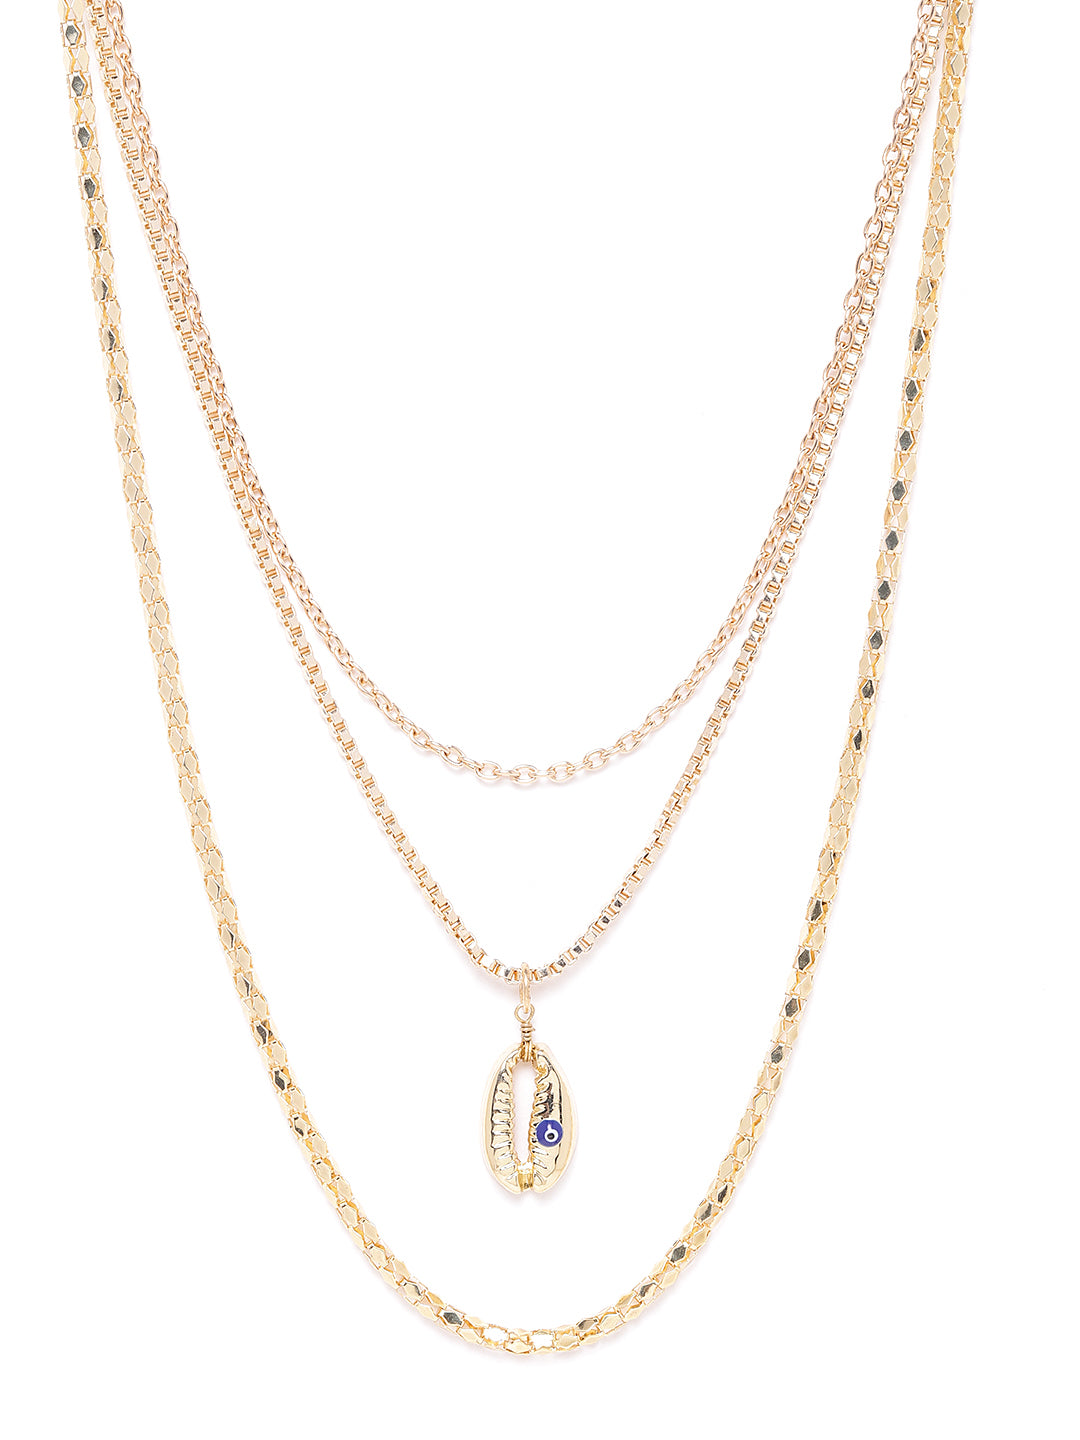 Blueberry gold Plated Evil Eye and shell detailing chain layered necklace